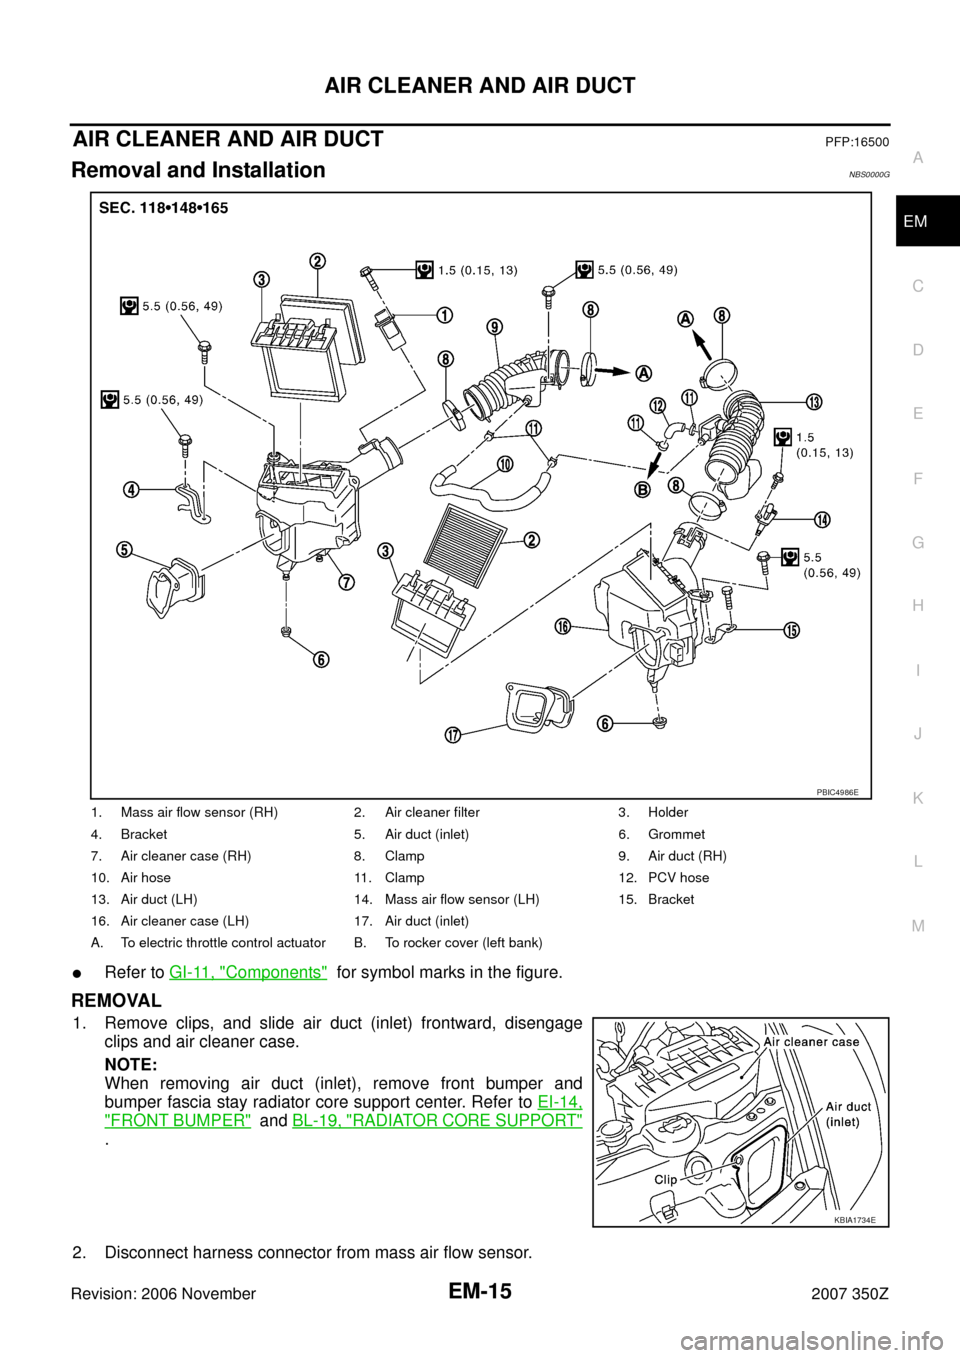 NISSAN 350Z 2007 Z33 Engine Mechanical Workshop Manual AIR CLEANER AND AIR DUCT
EM-15
C
D
E
F
G
H
I
J
K
L
MA
EM
Revision: 2006 November2007 350Z
AIR CLEANER AND AIR DUCTPFP:16500
Removal and InstallationNBS0000G
Refer to GI-11, "Components"  for symbol m